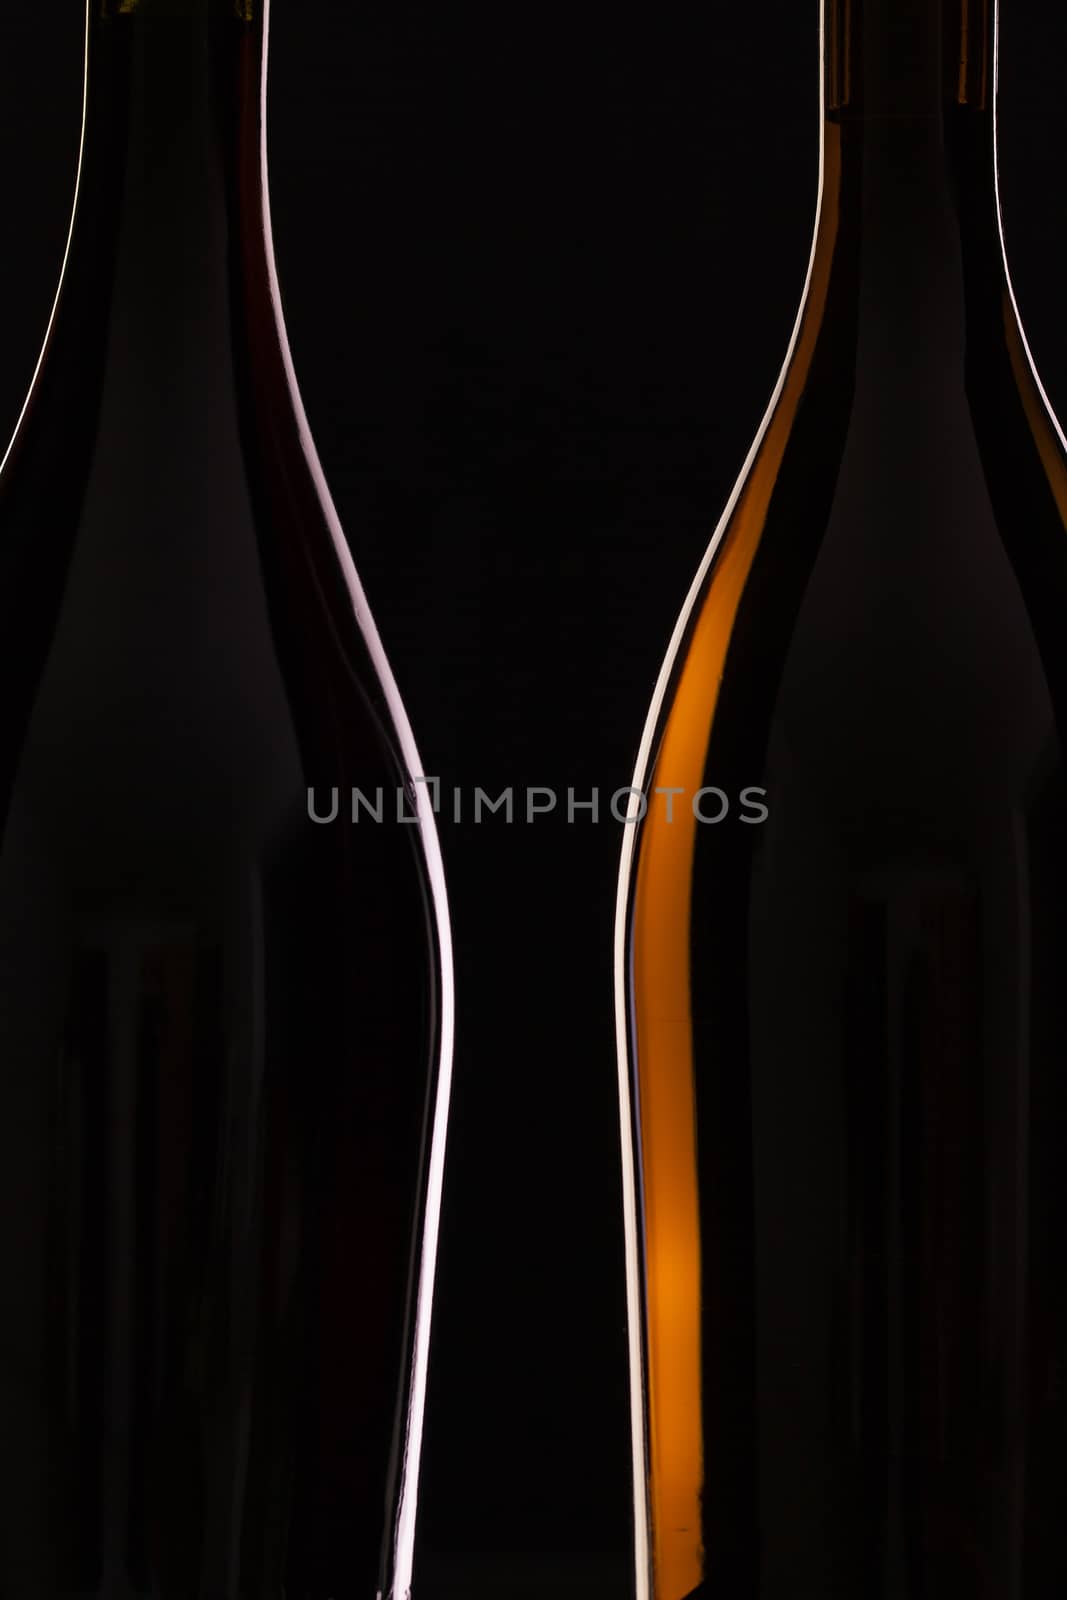 Two different bottles of wine on the black background